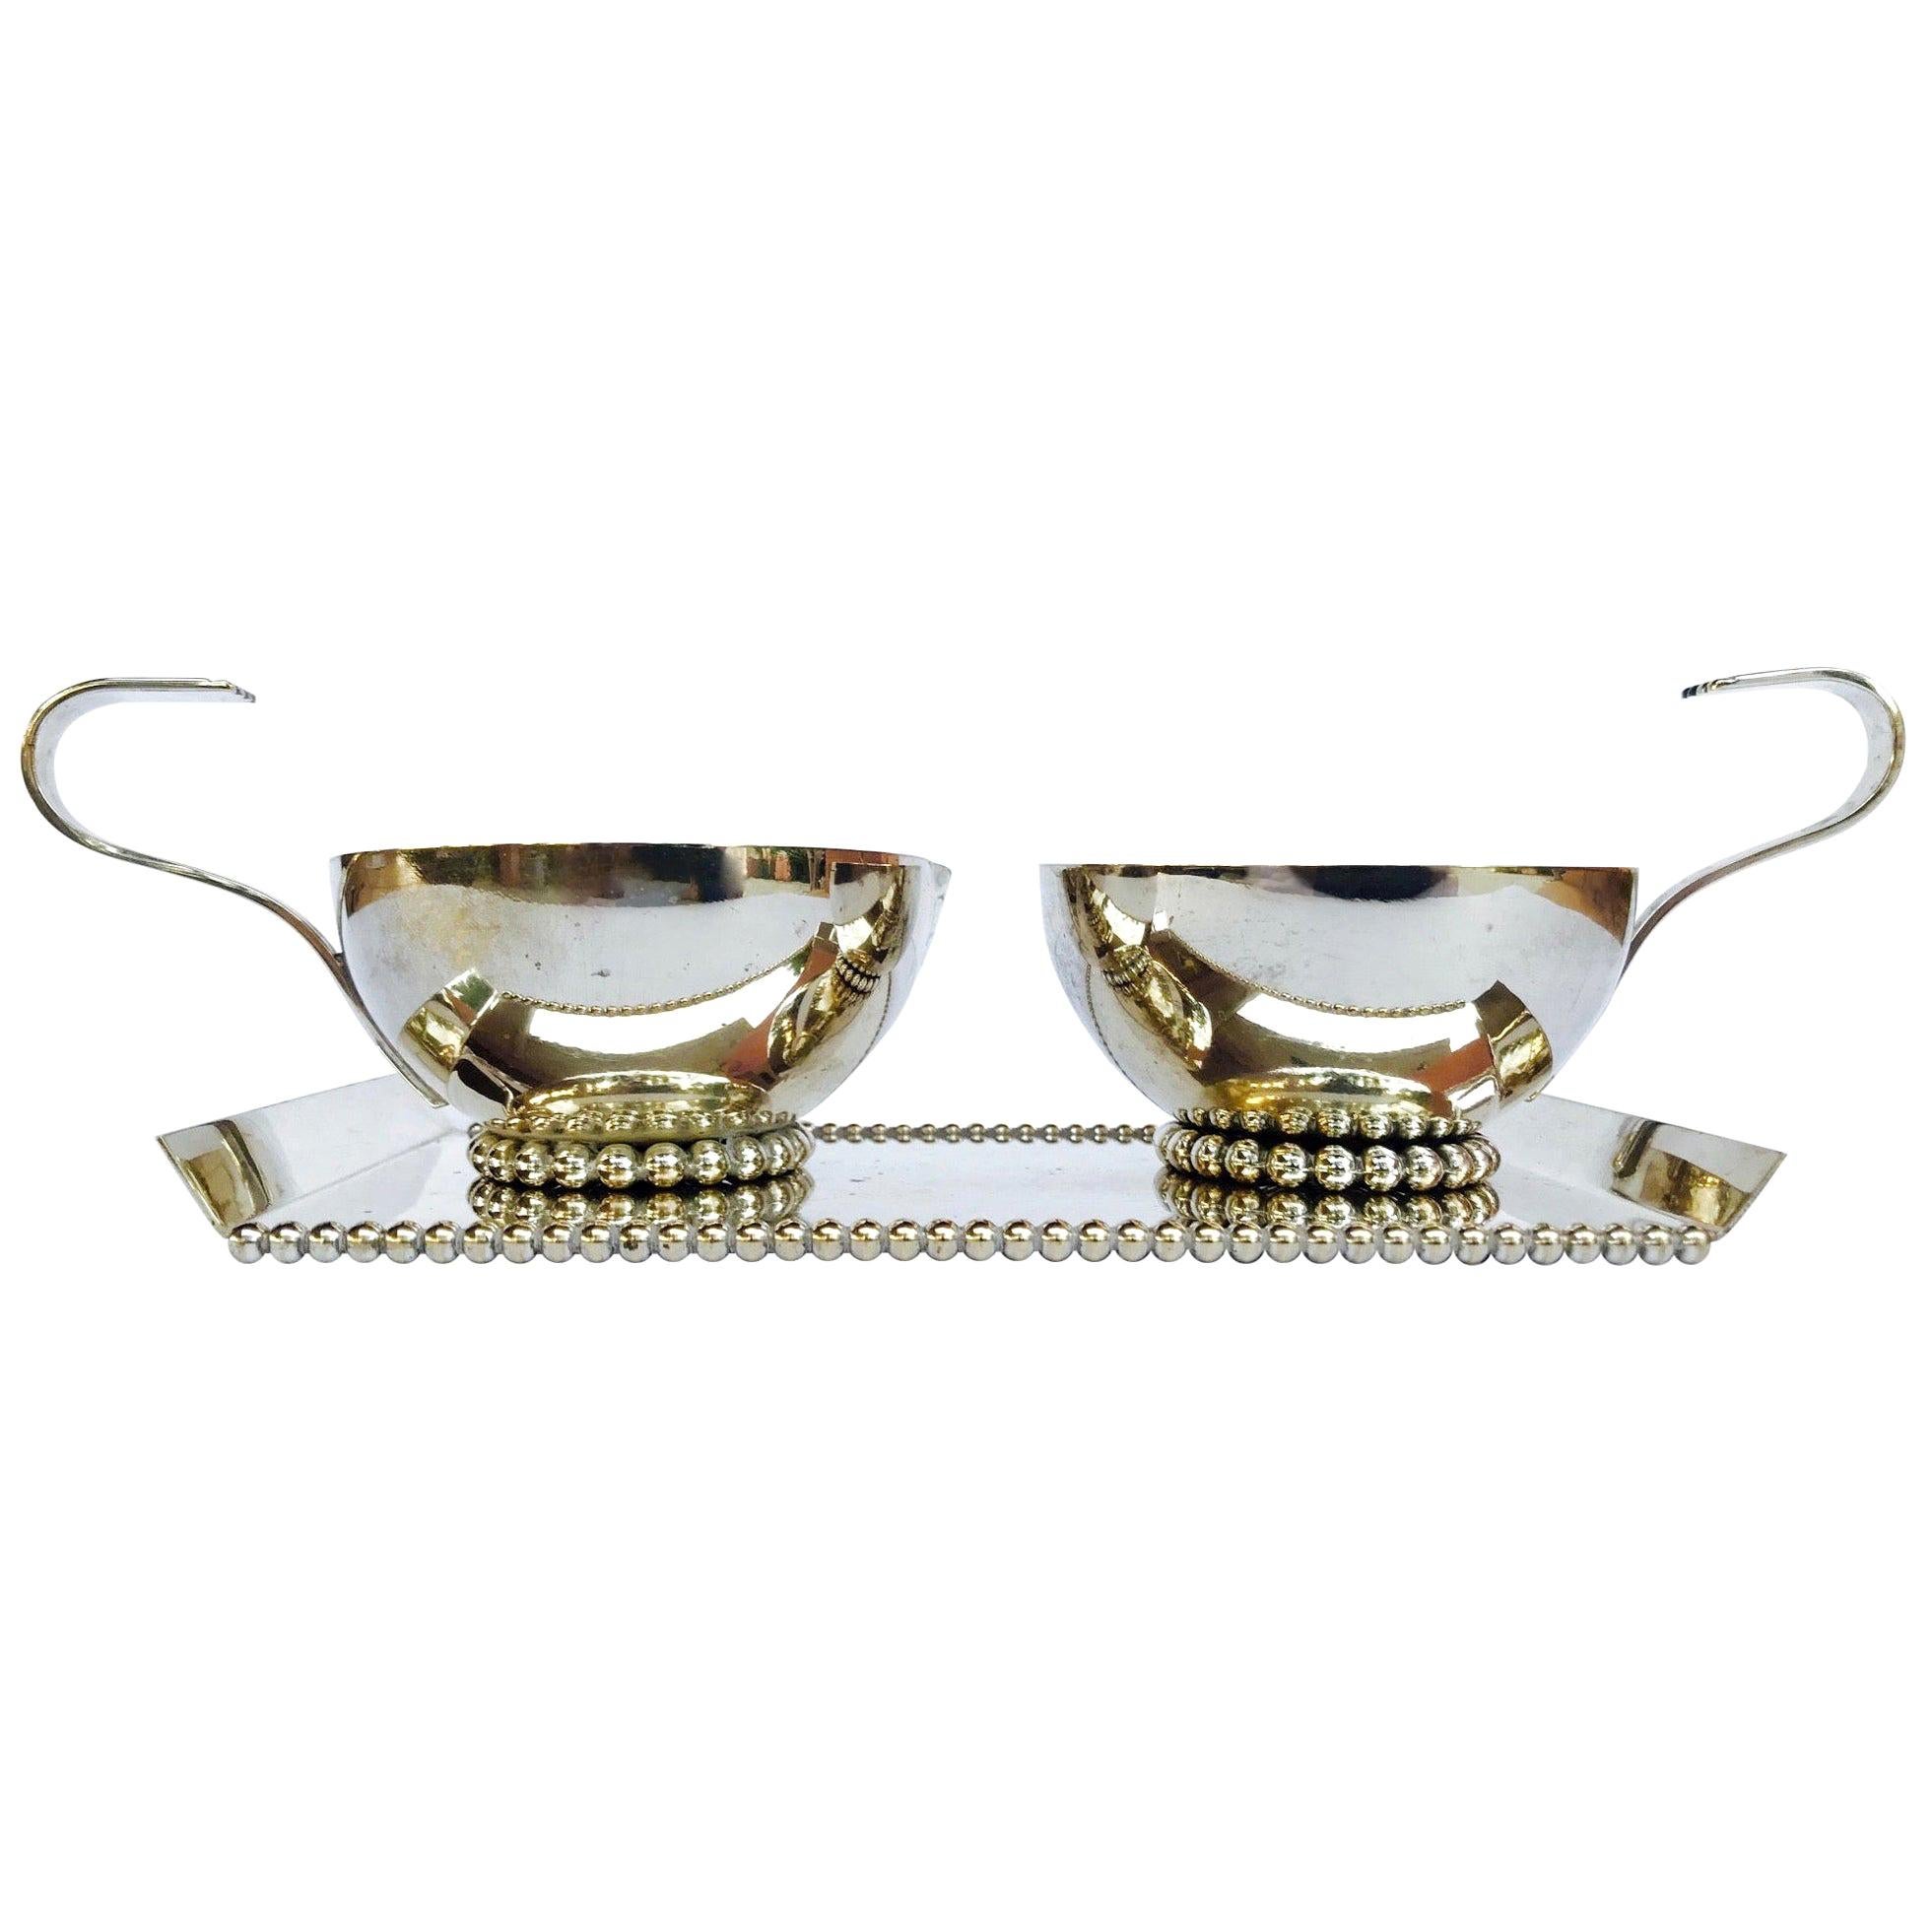 Vintage Silver Plated Sugar and Creamer Serving Set, Italy, C. 1970s For Sale